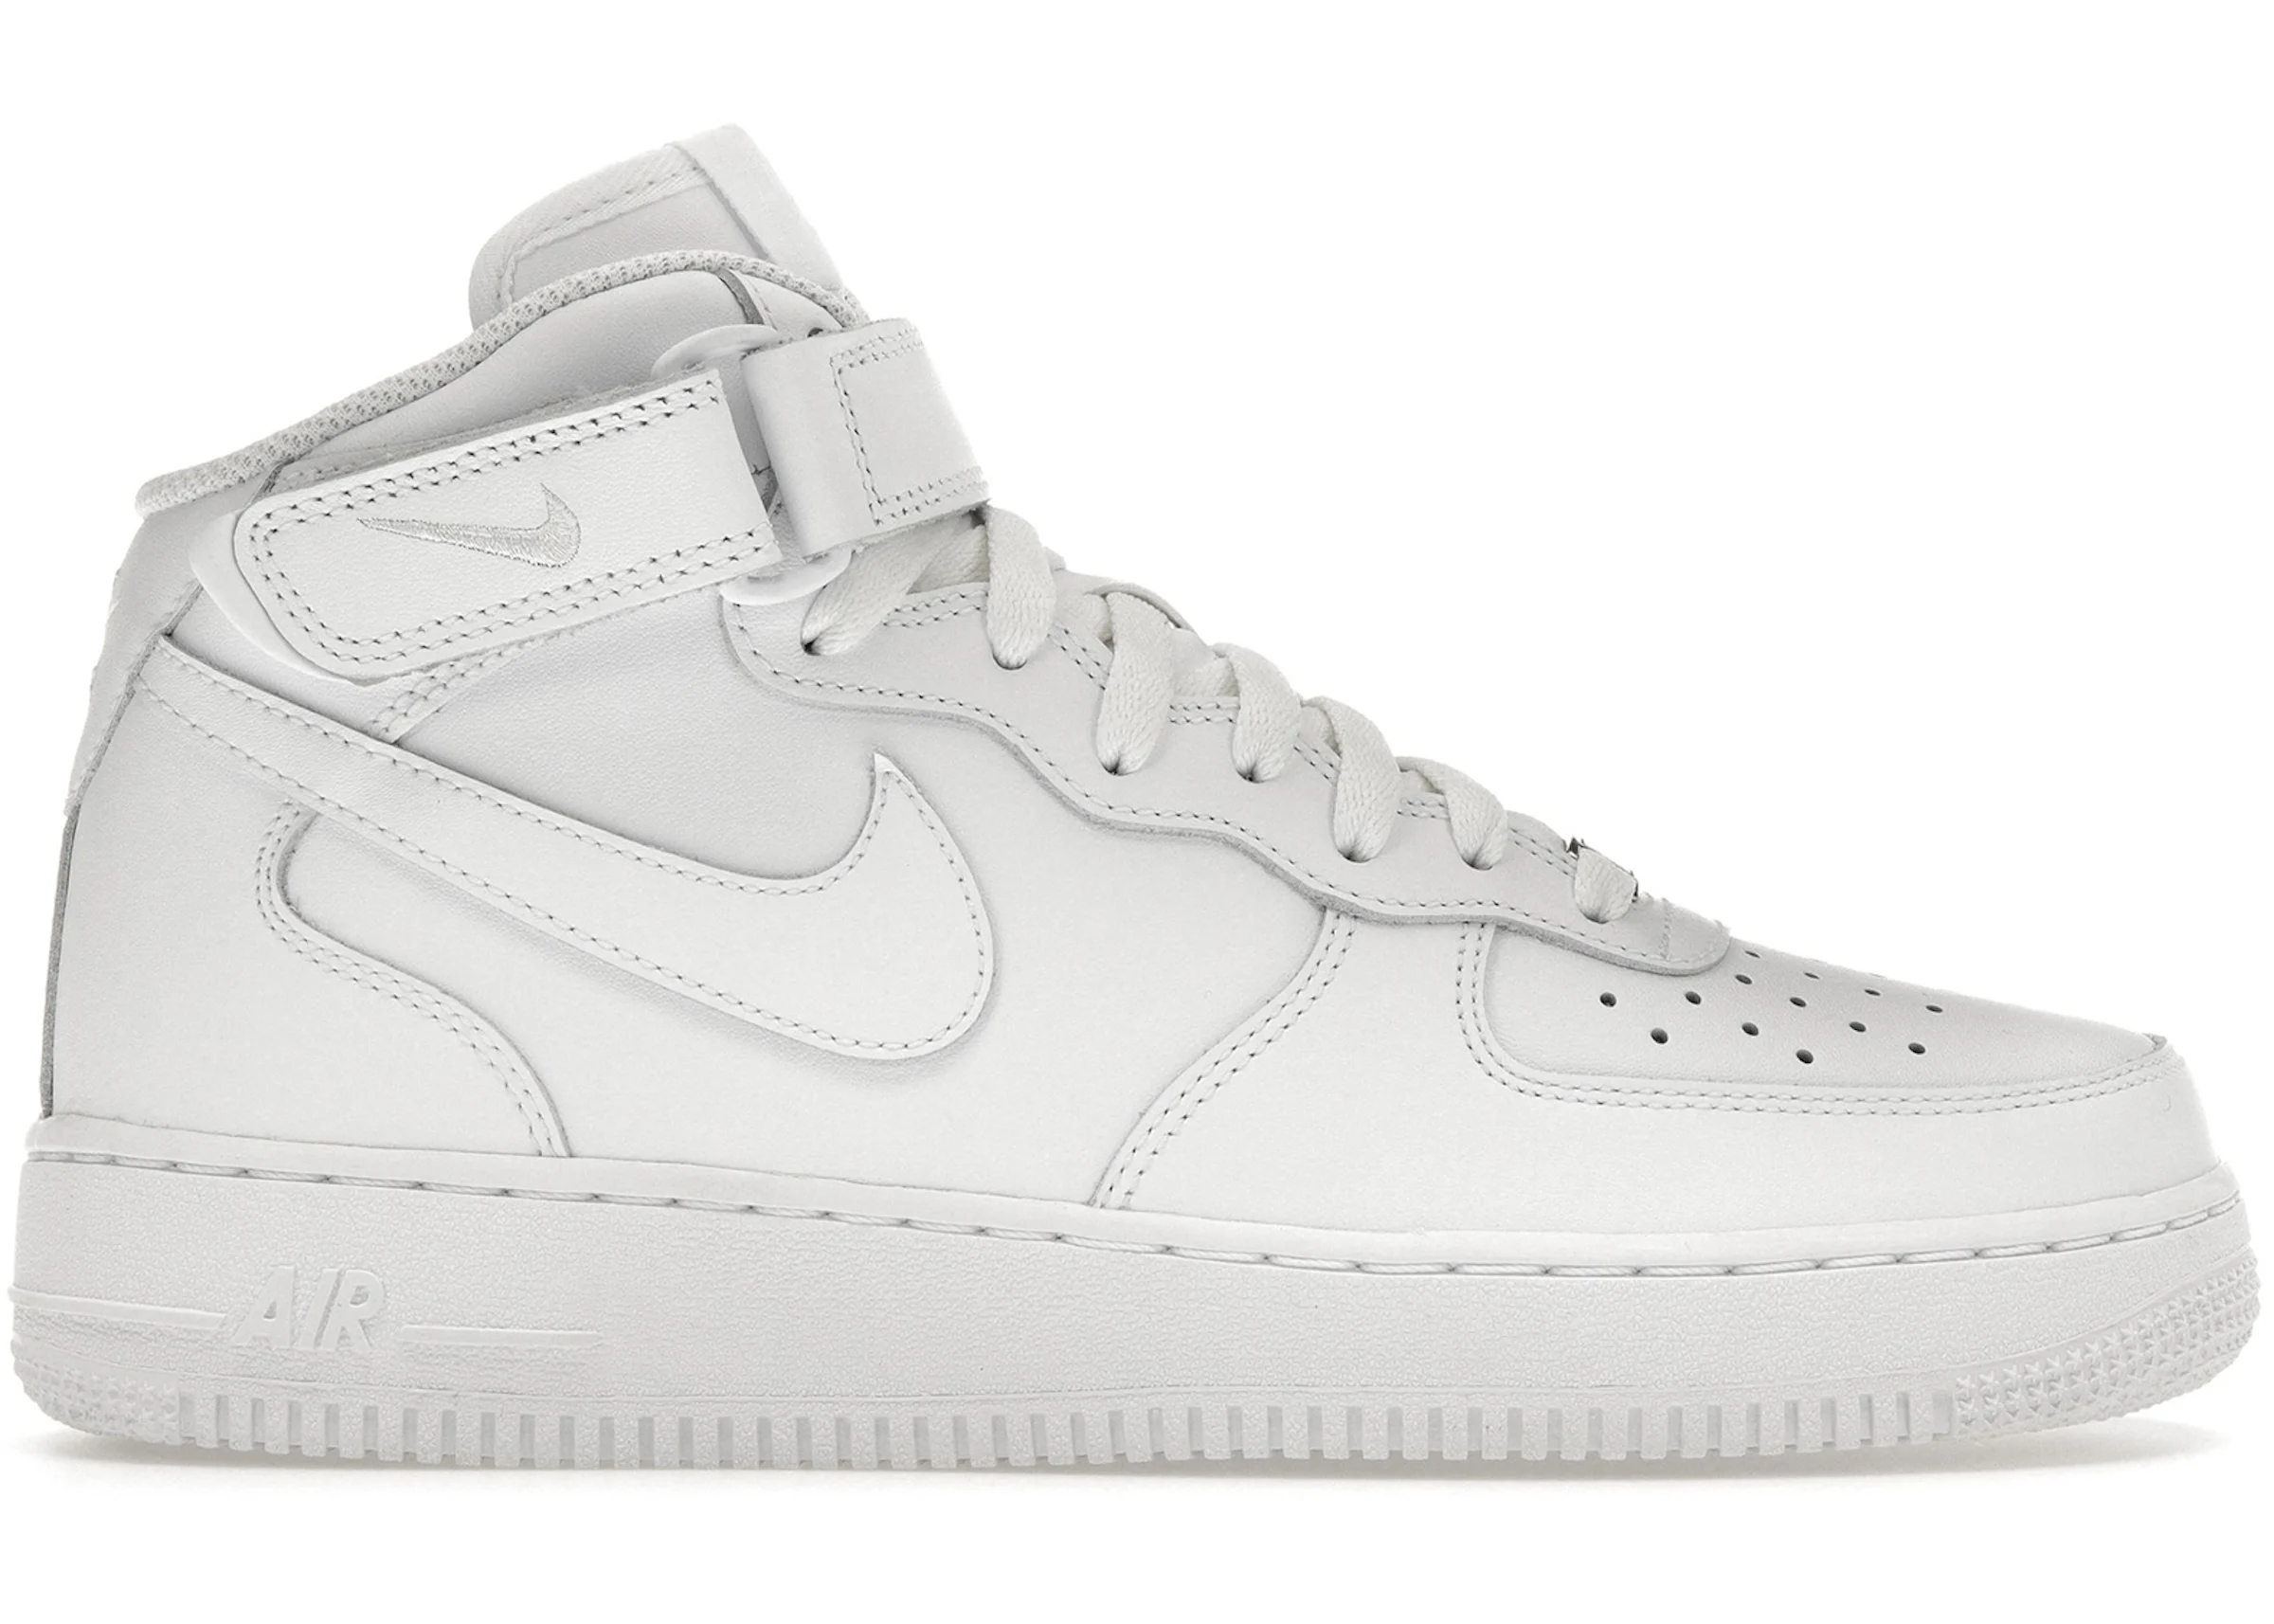 Nike Air Force 1 Mid '07 White Hombre - 315123-111/CW2289-111 - MX